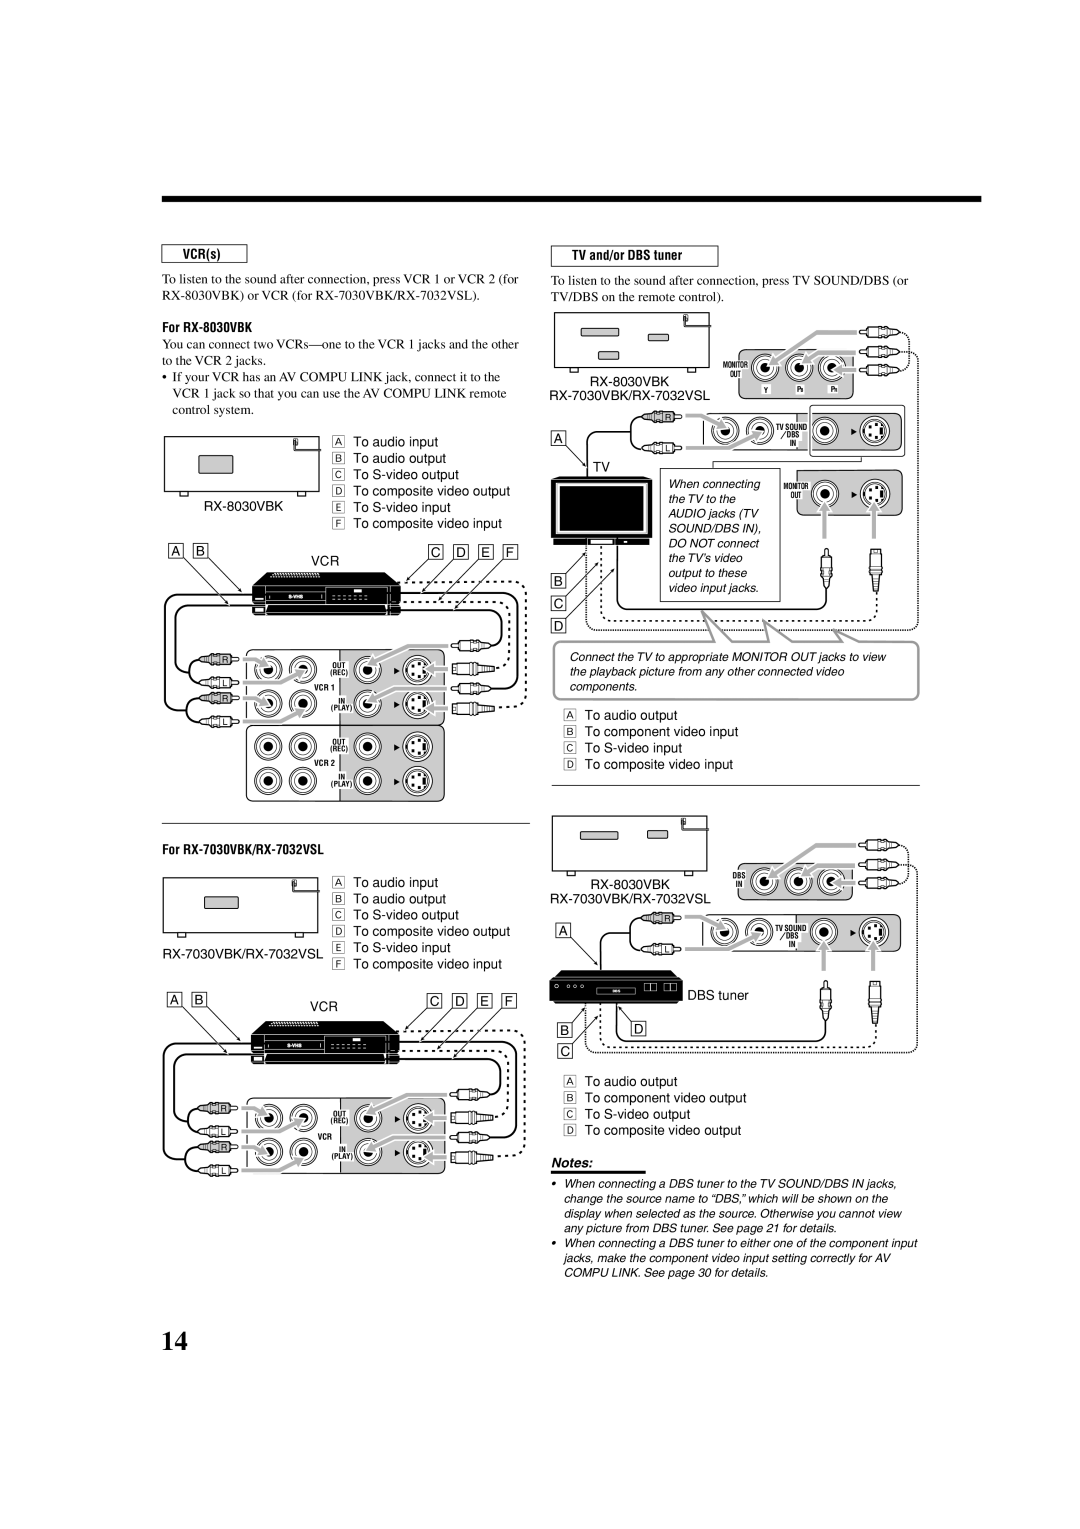 JVC RX7030VBK manual VCRs, For RX-8030VBK, For RX-7030VBK/RX-7032VSL, TV and/or DBS tuner, Notes 